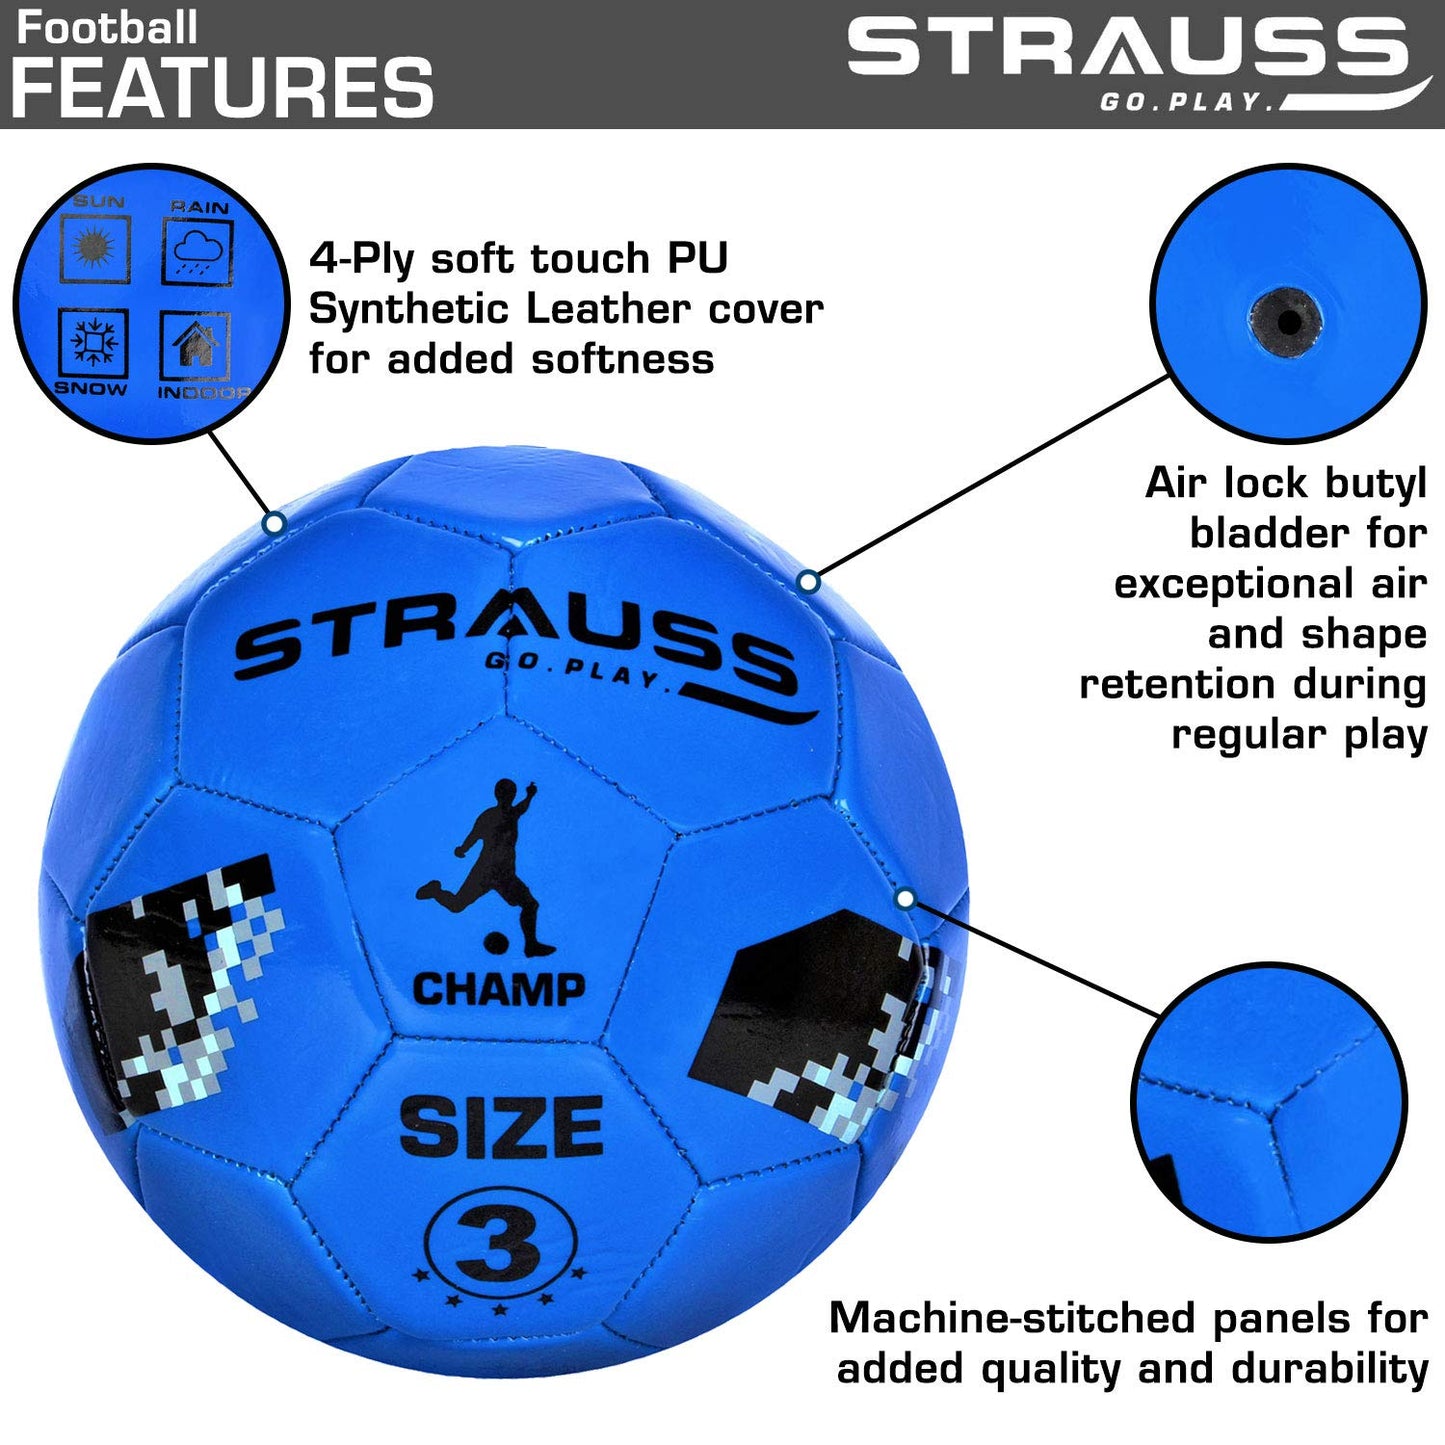 STRAUSS Official Football Size 3 Professional Match Ball for Indoor  Outdoor Games  Training for Kids  Adults  Granular Texture with High-Performance Grained Surface Blue